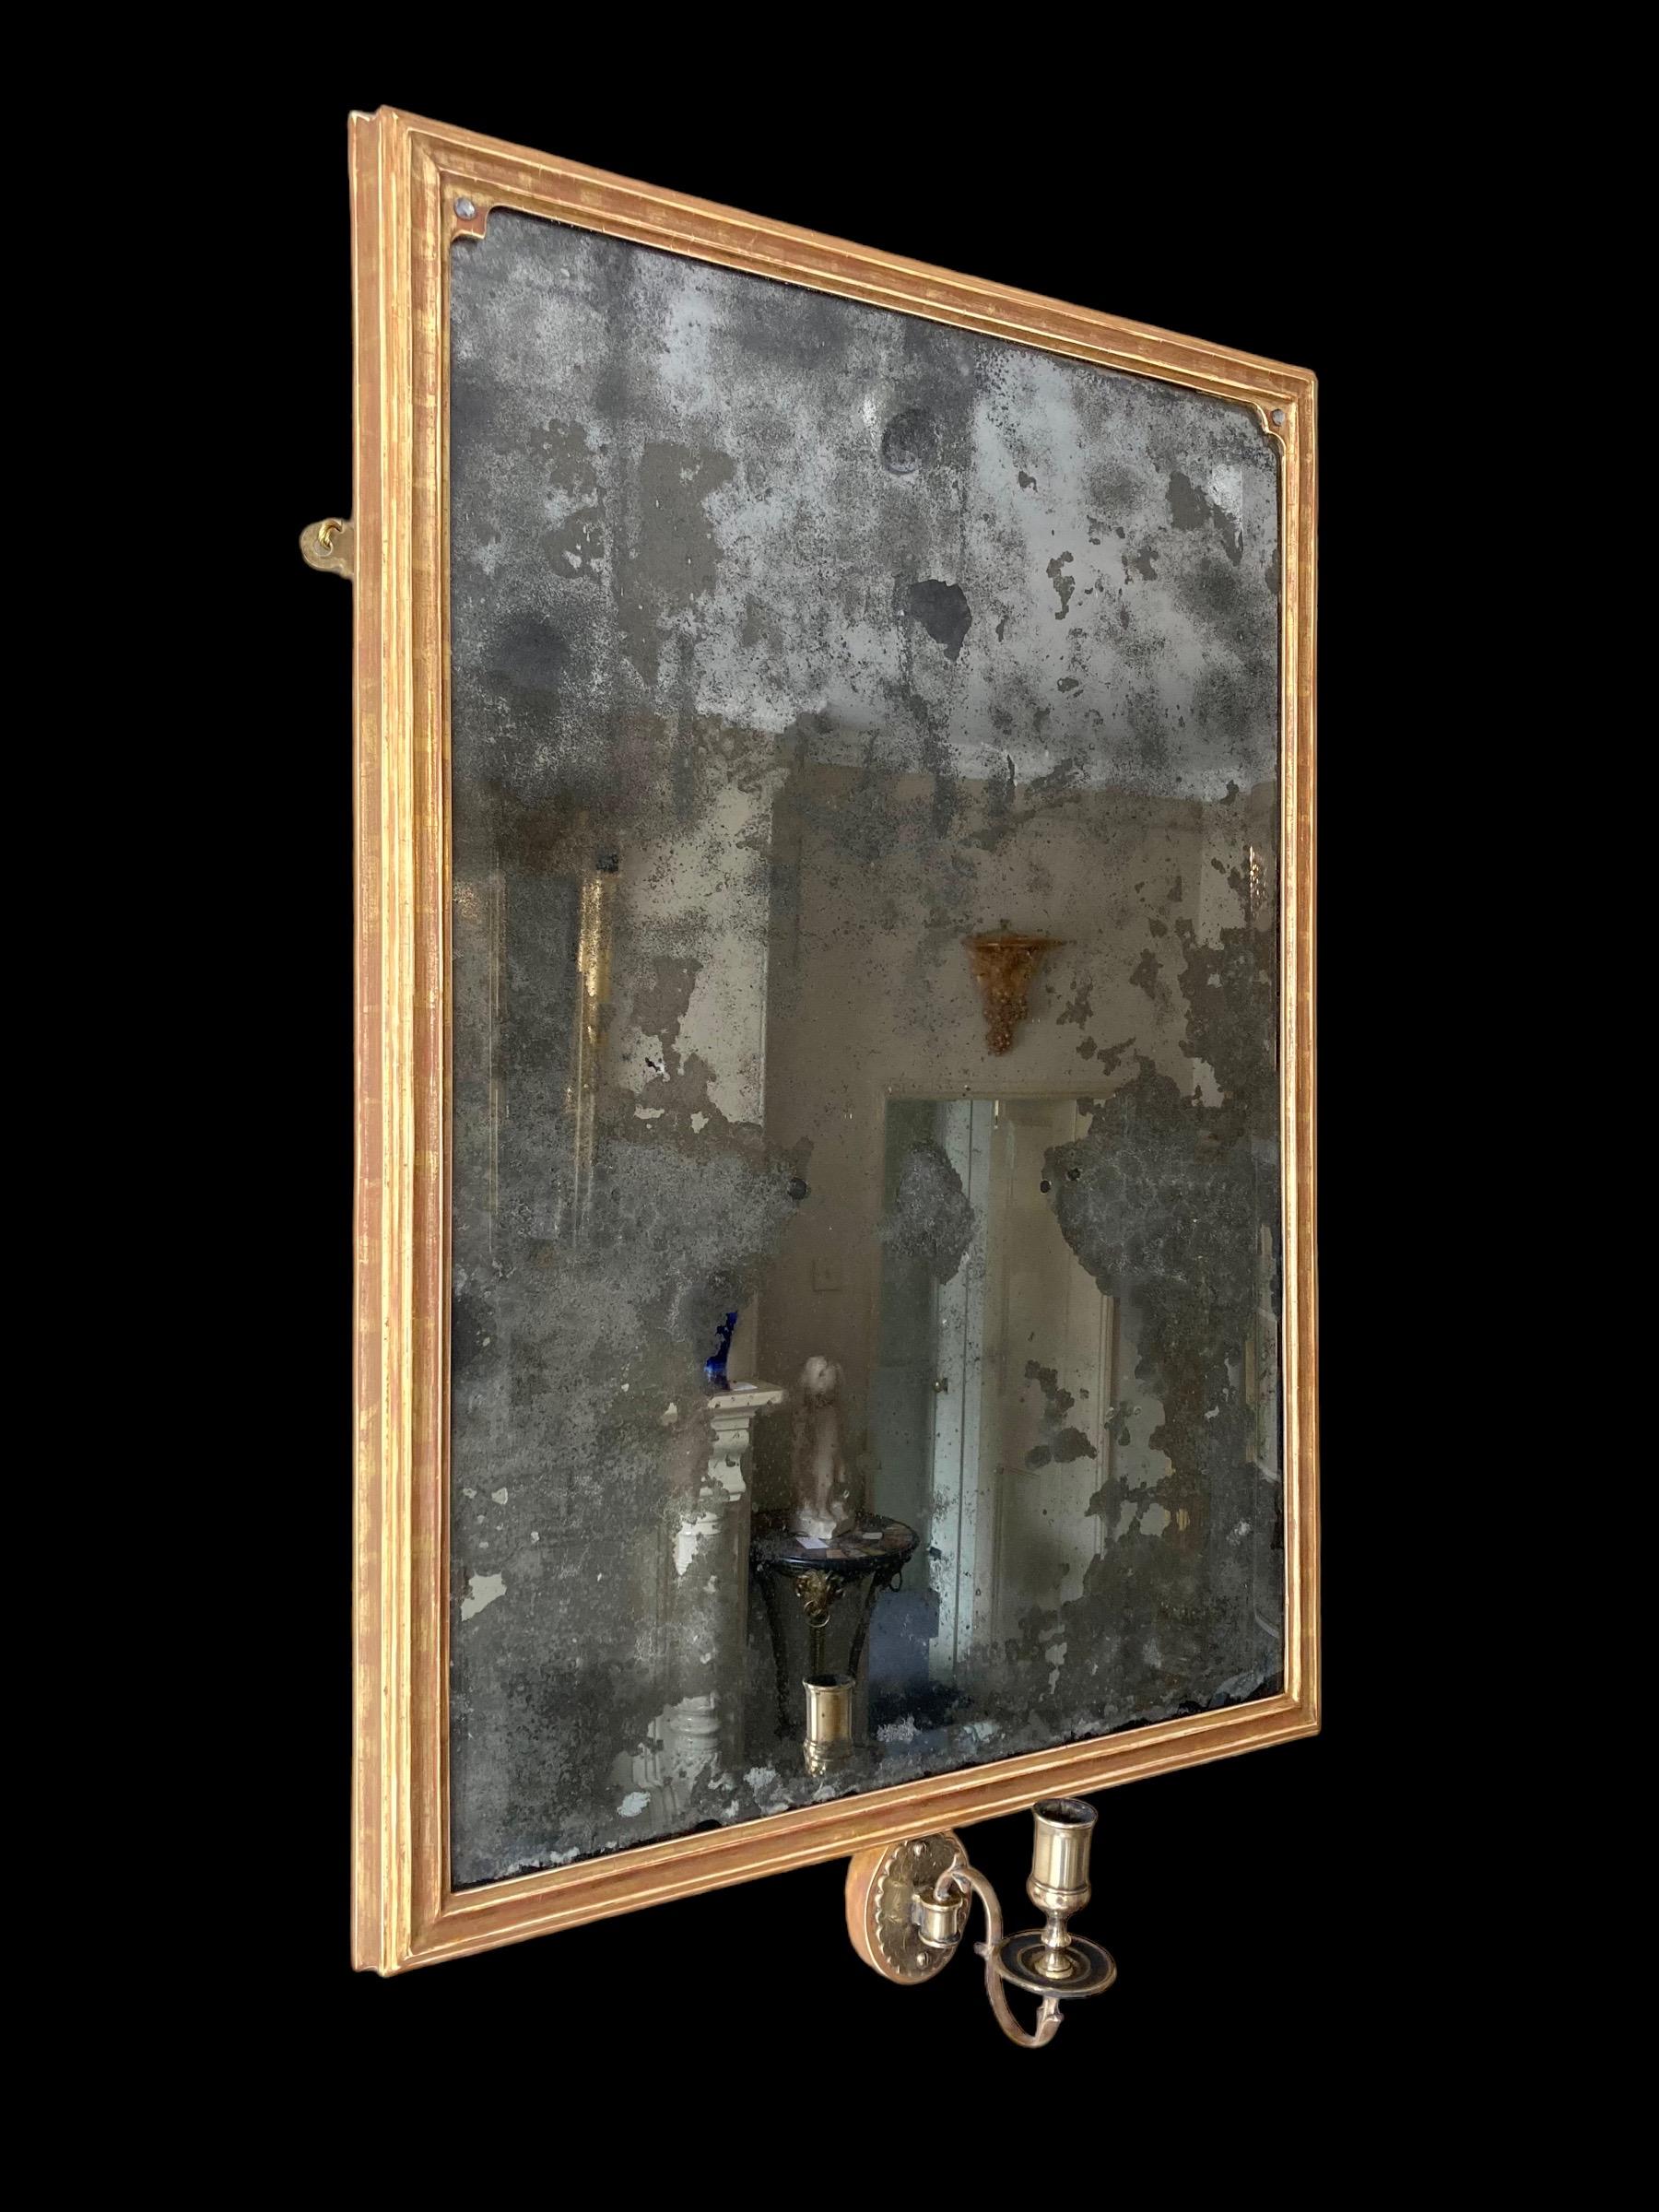 A striking rectangular giltwood wall mirror with single candle arm.
The heavily foxed 18th Century bevelled edge mercury mirror plate is housed in a later classic rectangular gilded frame mounted with a single brass candle arm.
A highly decorative